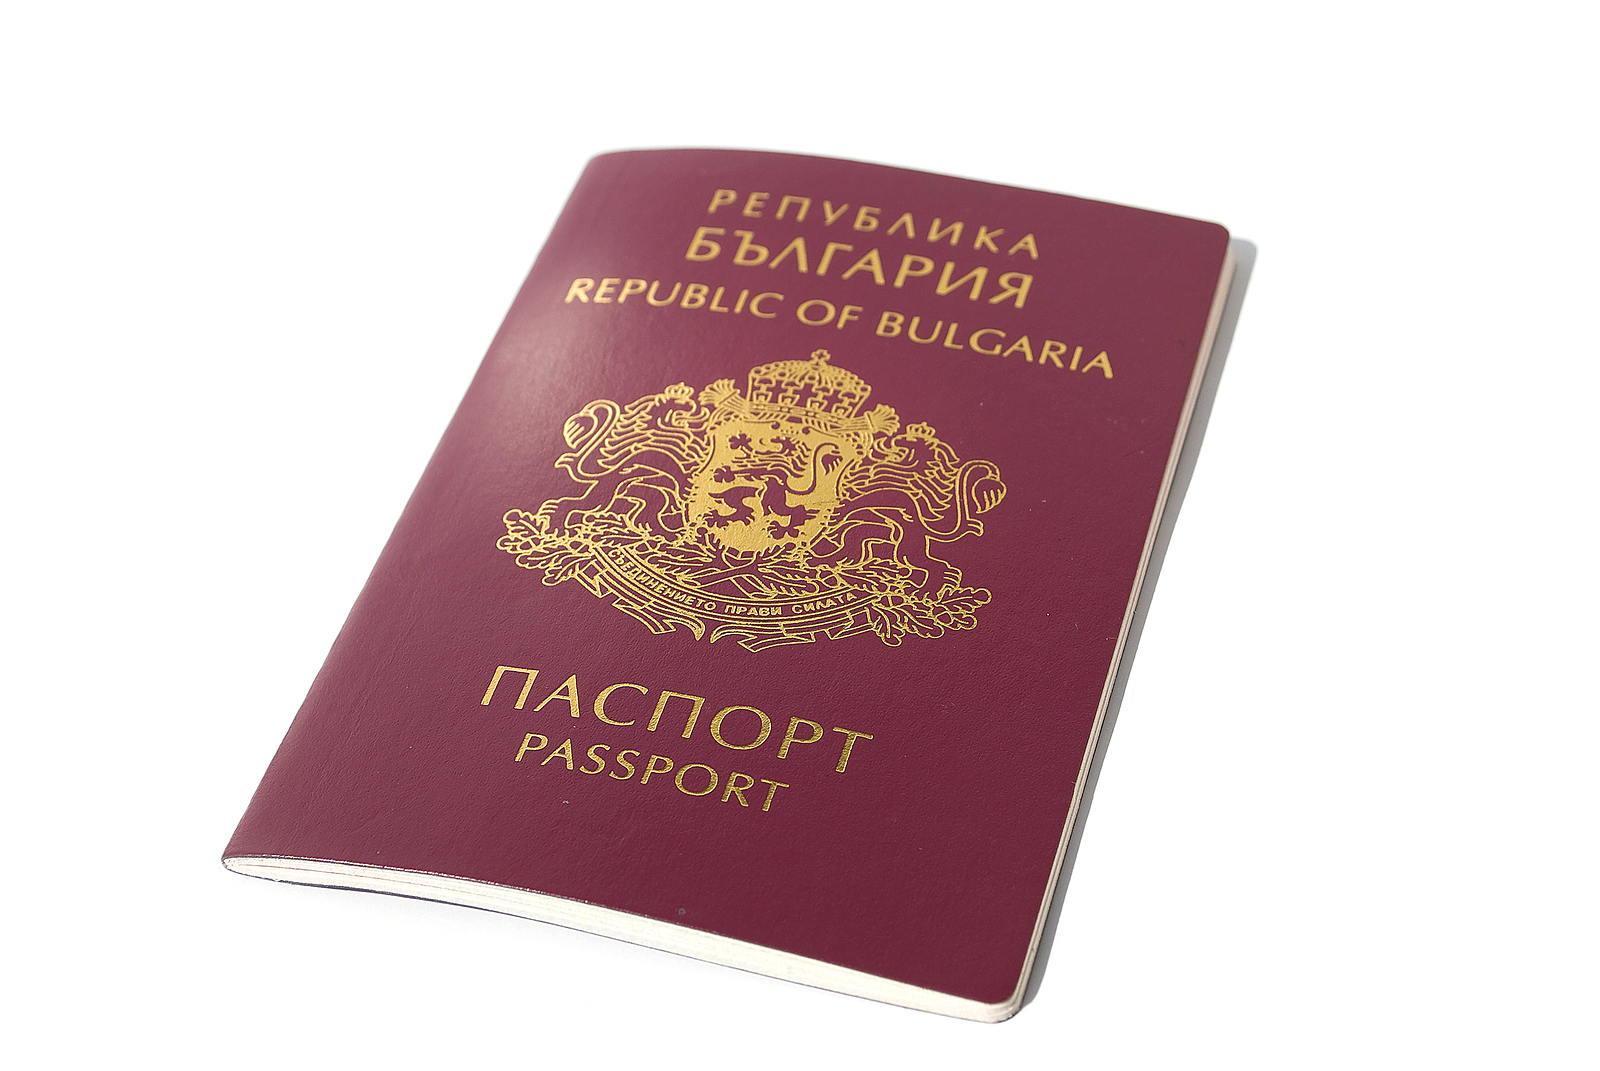 Vietnam Reissue E-visa For Bulgarian After March 15, 2022 | Vietnam Entry Requirements For Bulgarian 2022